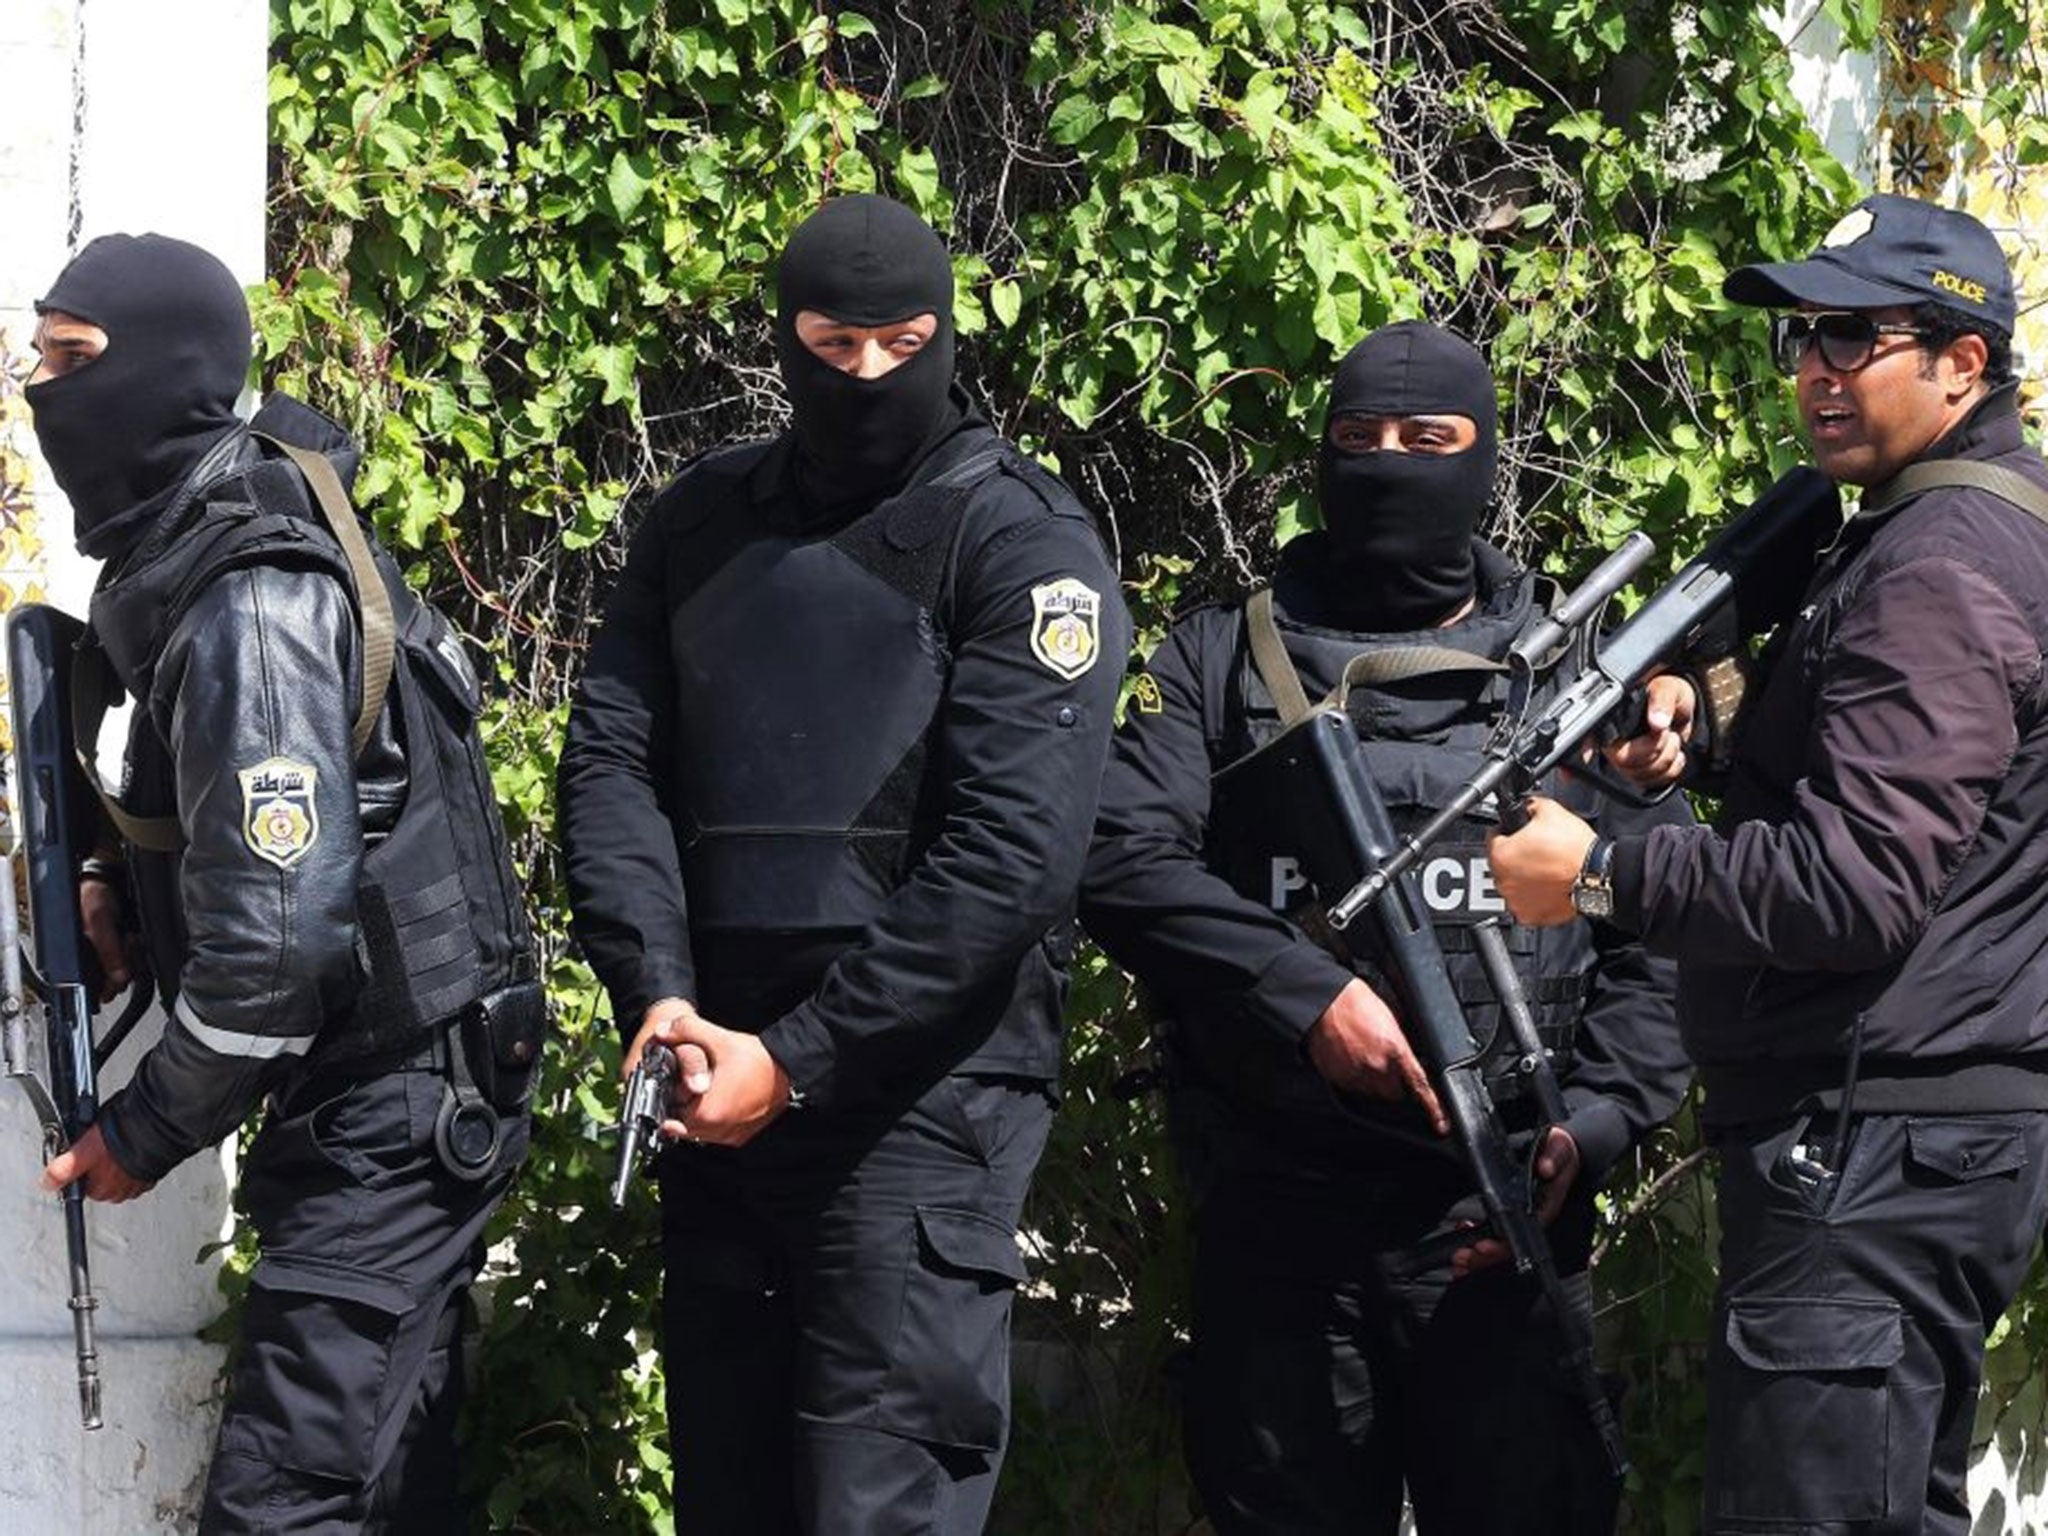 Members of the Tunisian security services take up positions after gunmen reportedly took hostages near the country's parliament, outside the National Bardo Museum, Tunis, Tunisia, 18 March 2015. According to local reports eight people were killed, mostly